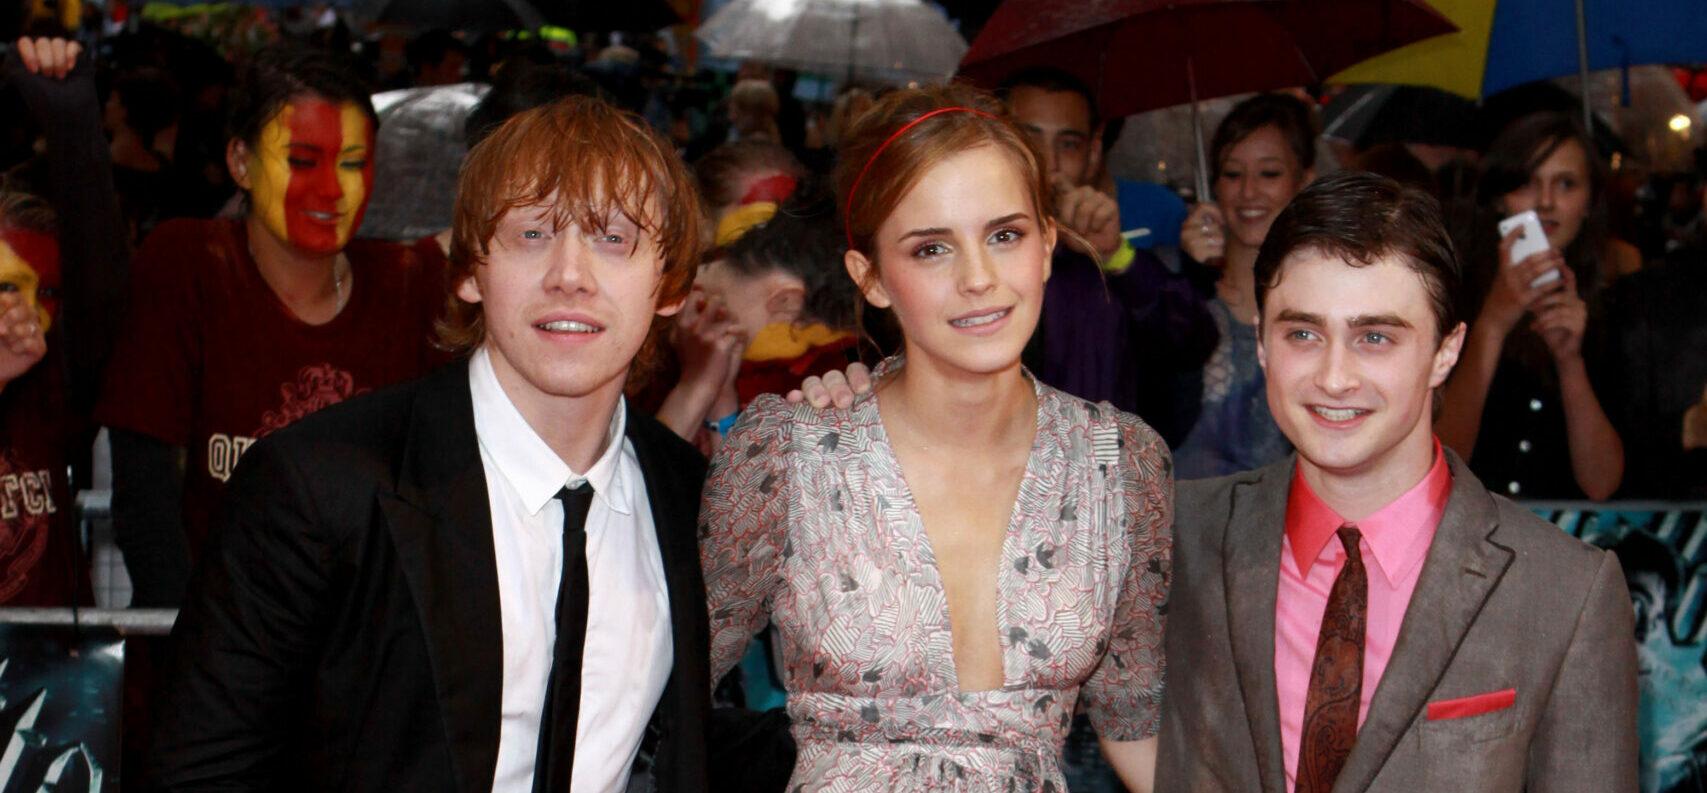 Emma Watson, Rupert Grint, and Daniel Radcliffe at the "Harry Potter and the Half-Blood Prince" World premiere at the Odeon Leicester Square, London, England.